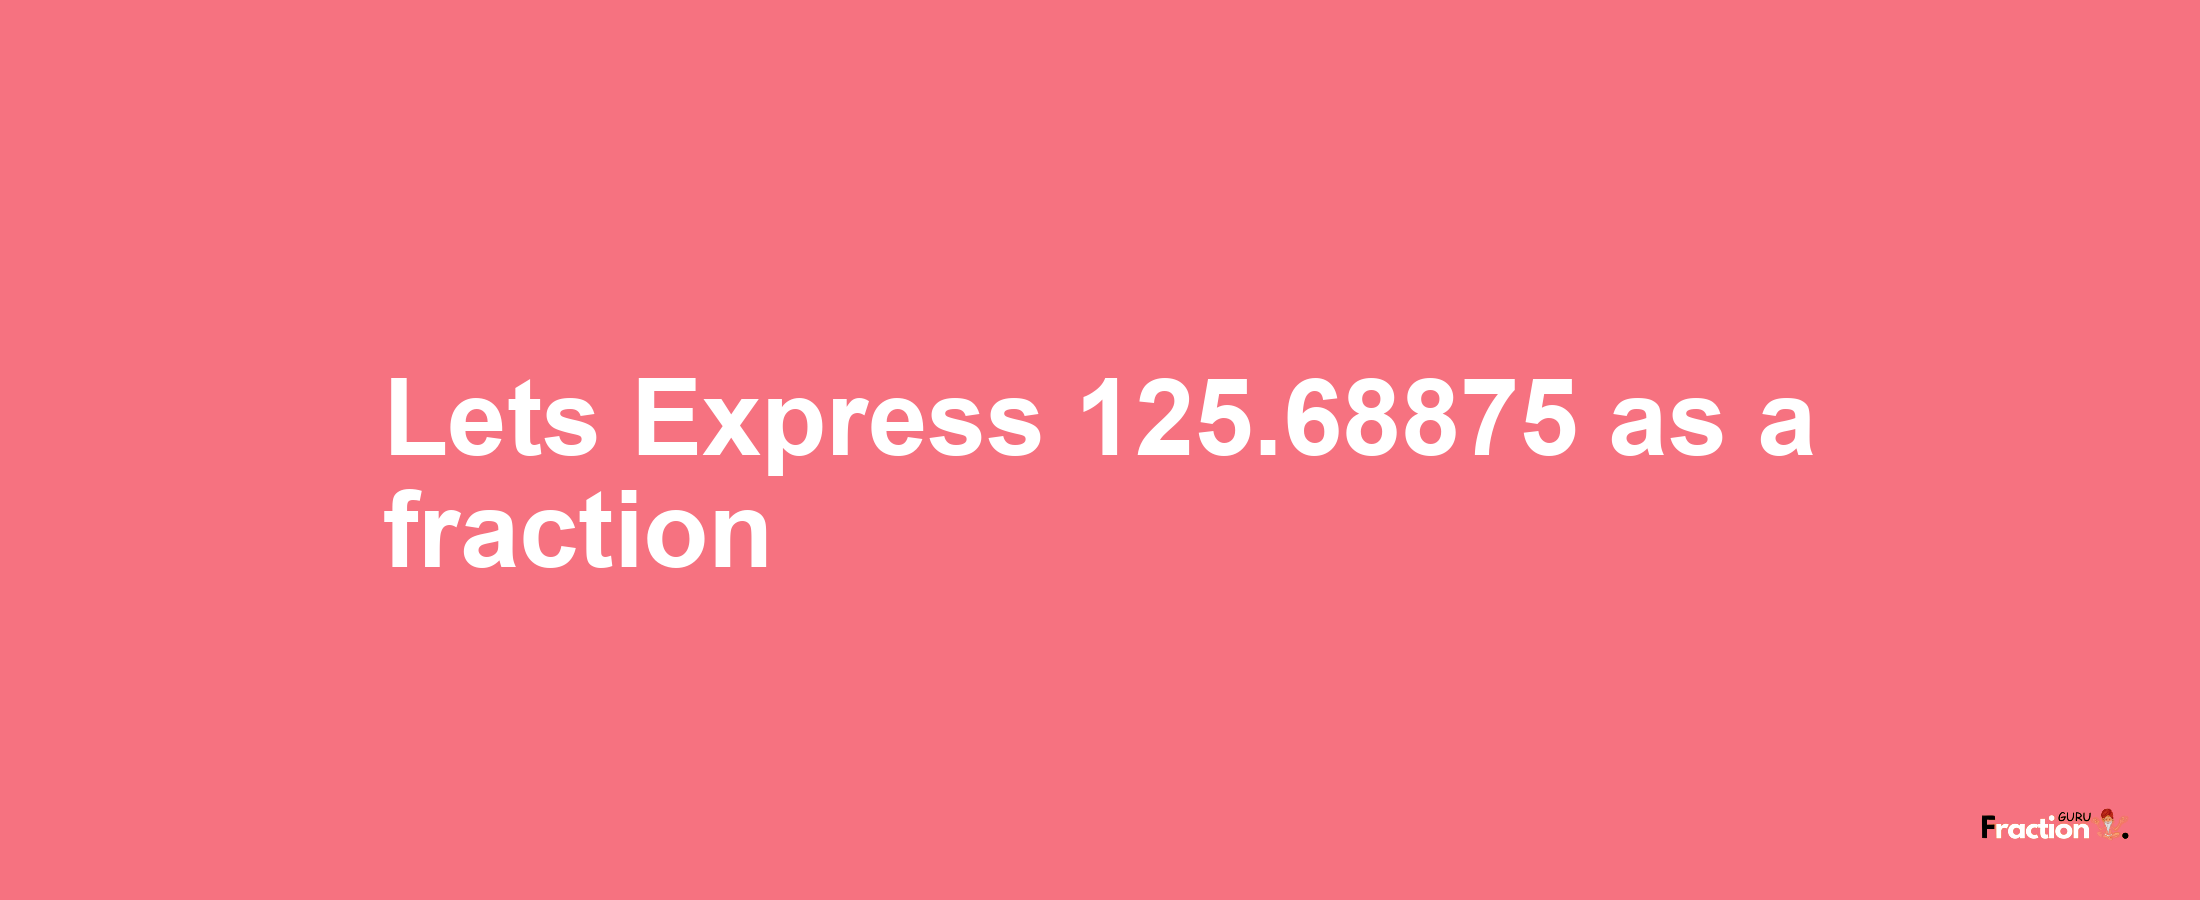 Lets Express 125.68875 as afraction